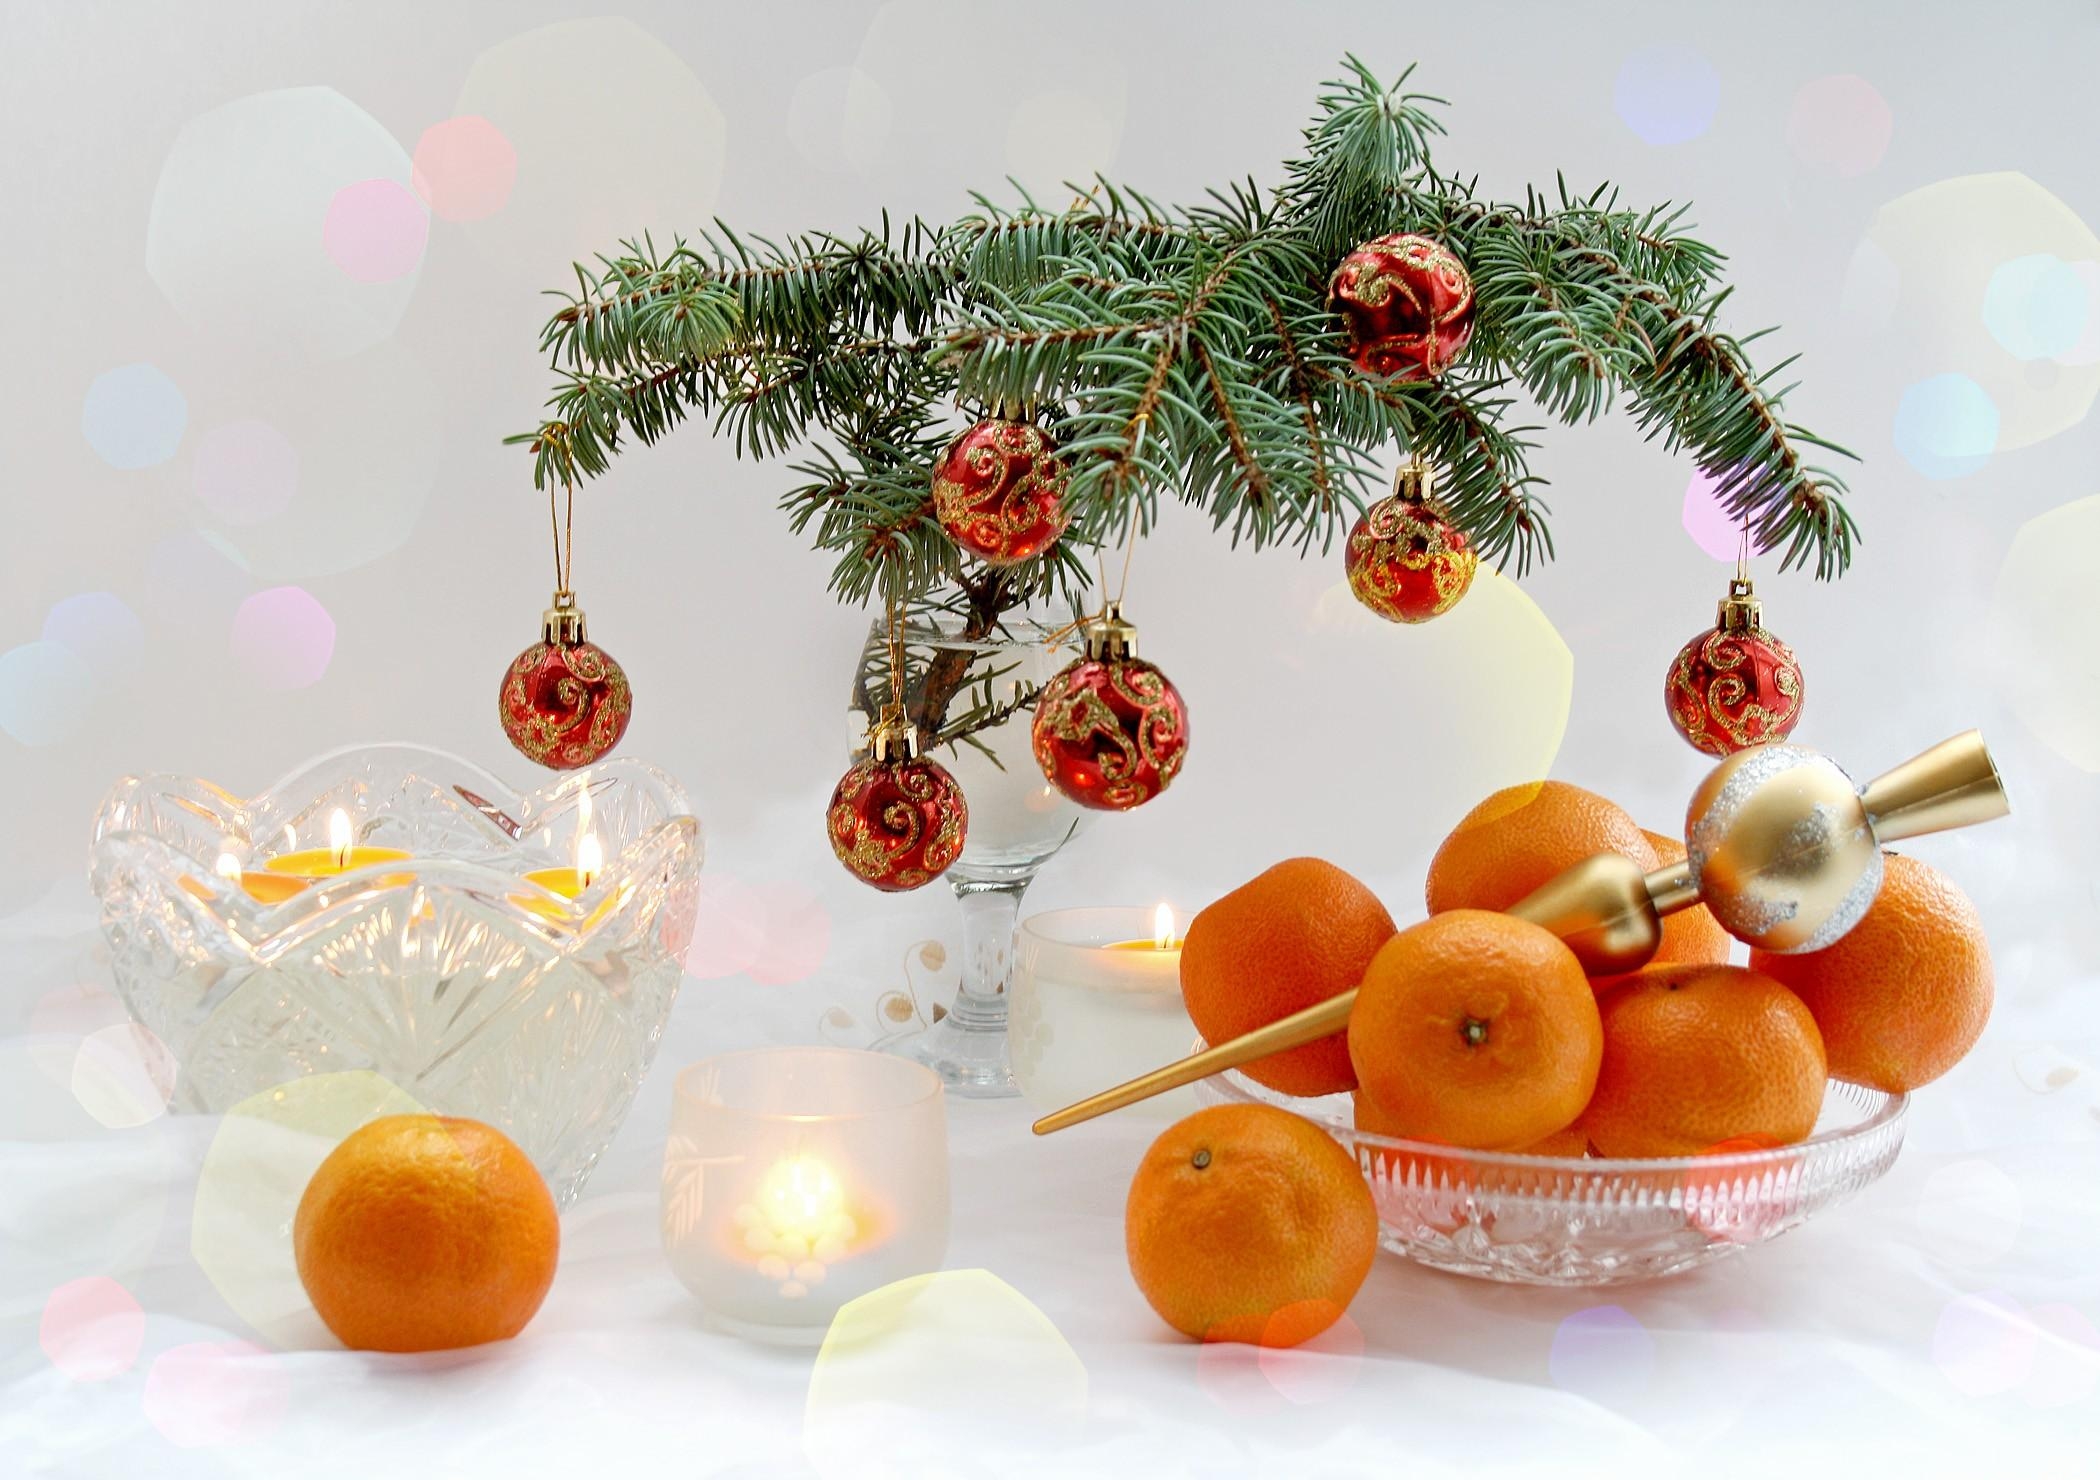 157501 download wallpaper holidays, candles, new year, tangerines, christmas, branch, table, treats screensavers and pictures for free